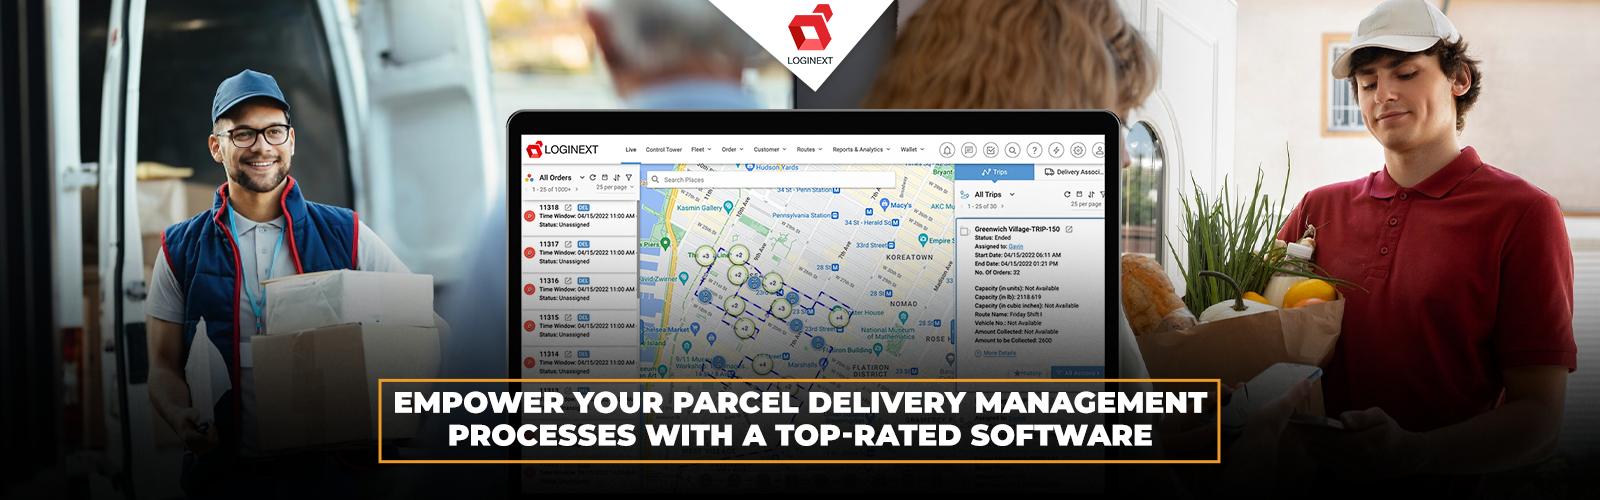 Top-rated parcel delivery management software